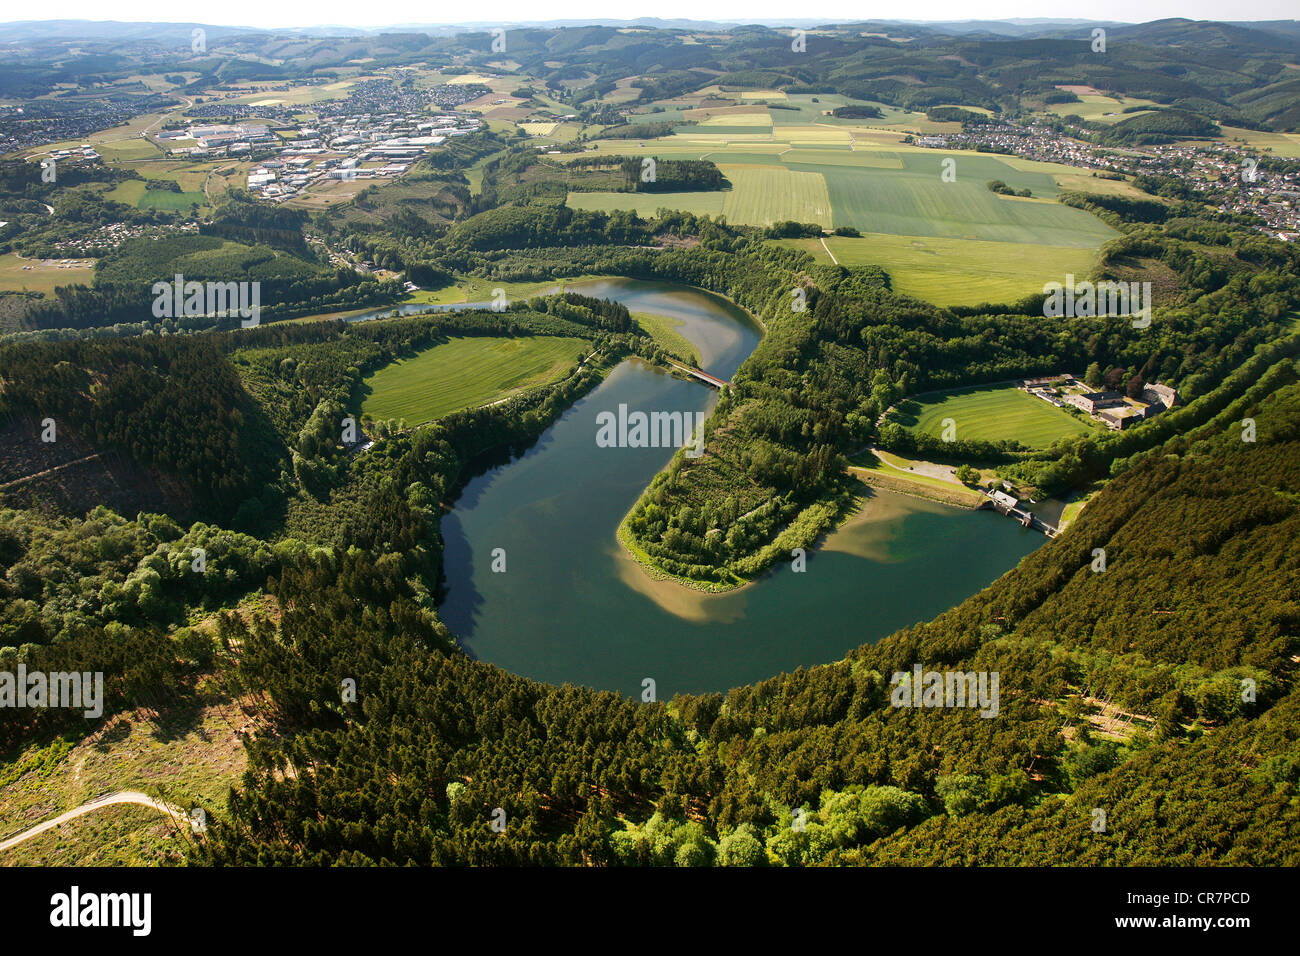 Aerial view, Ahauser Stausee storage lake, areas of Attendorn city and Finnentrop town, Kreis Olpe county, Sauerland region Stock Photo